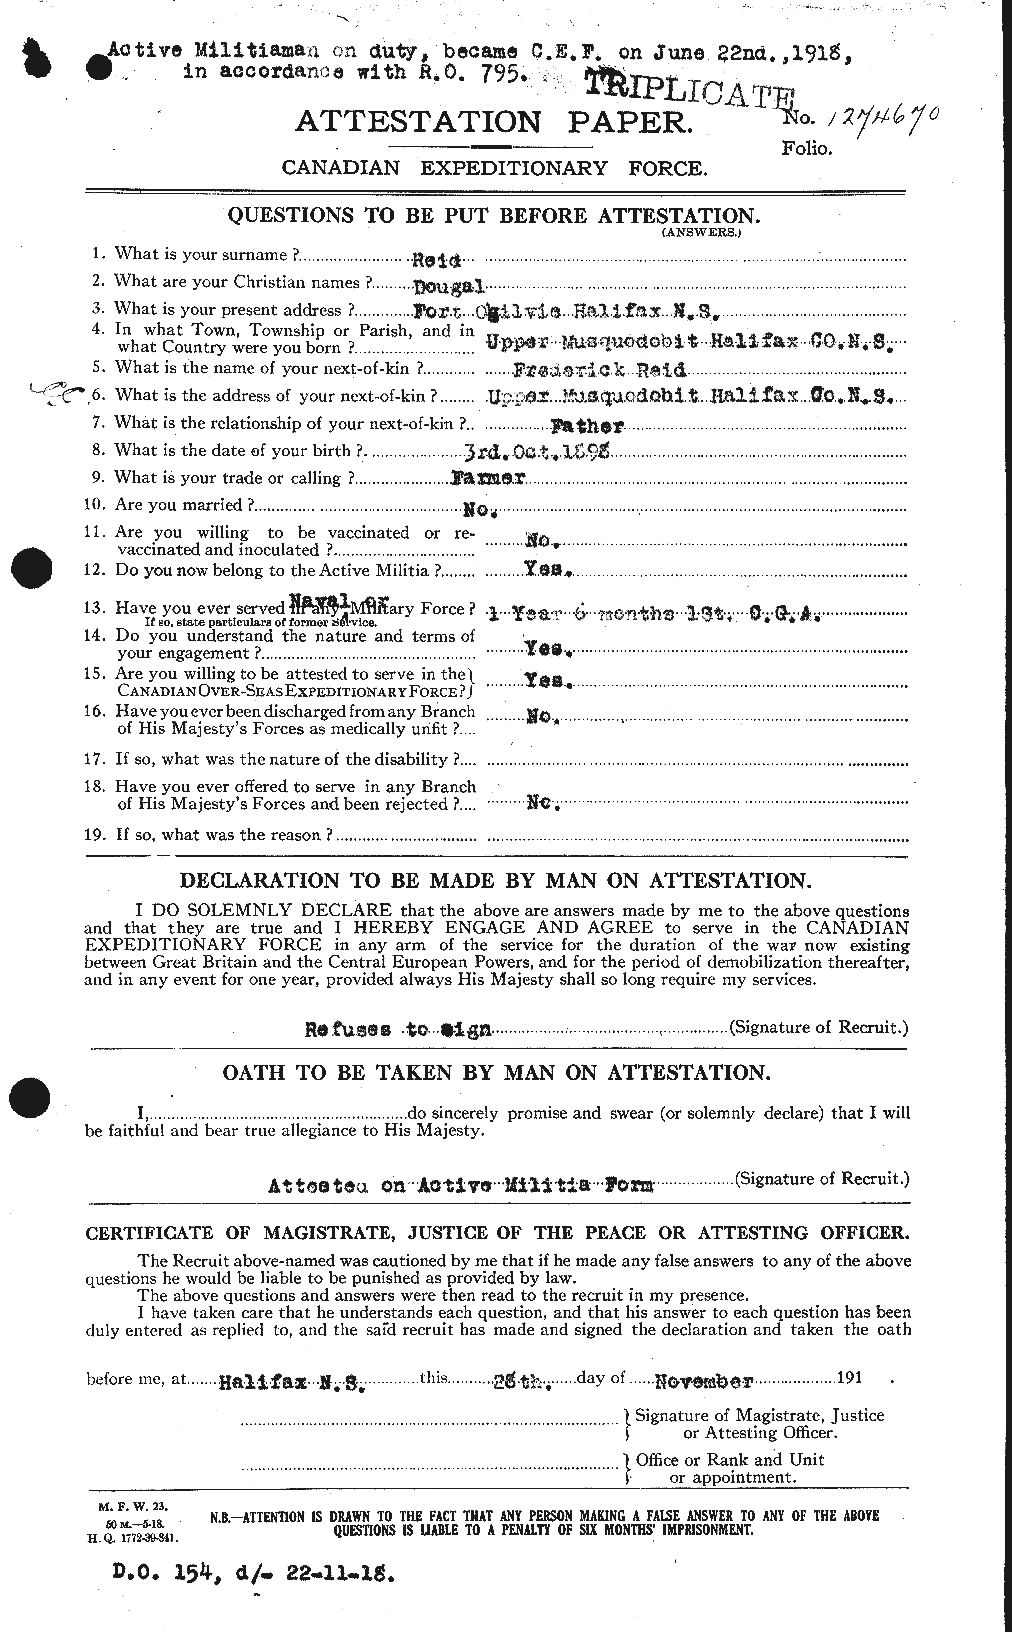 Personnel Records of the First World War - CEF 597964a